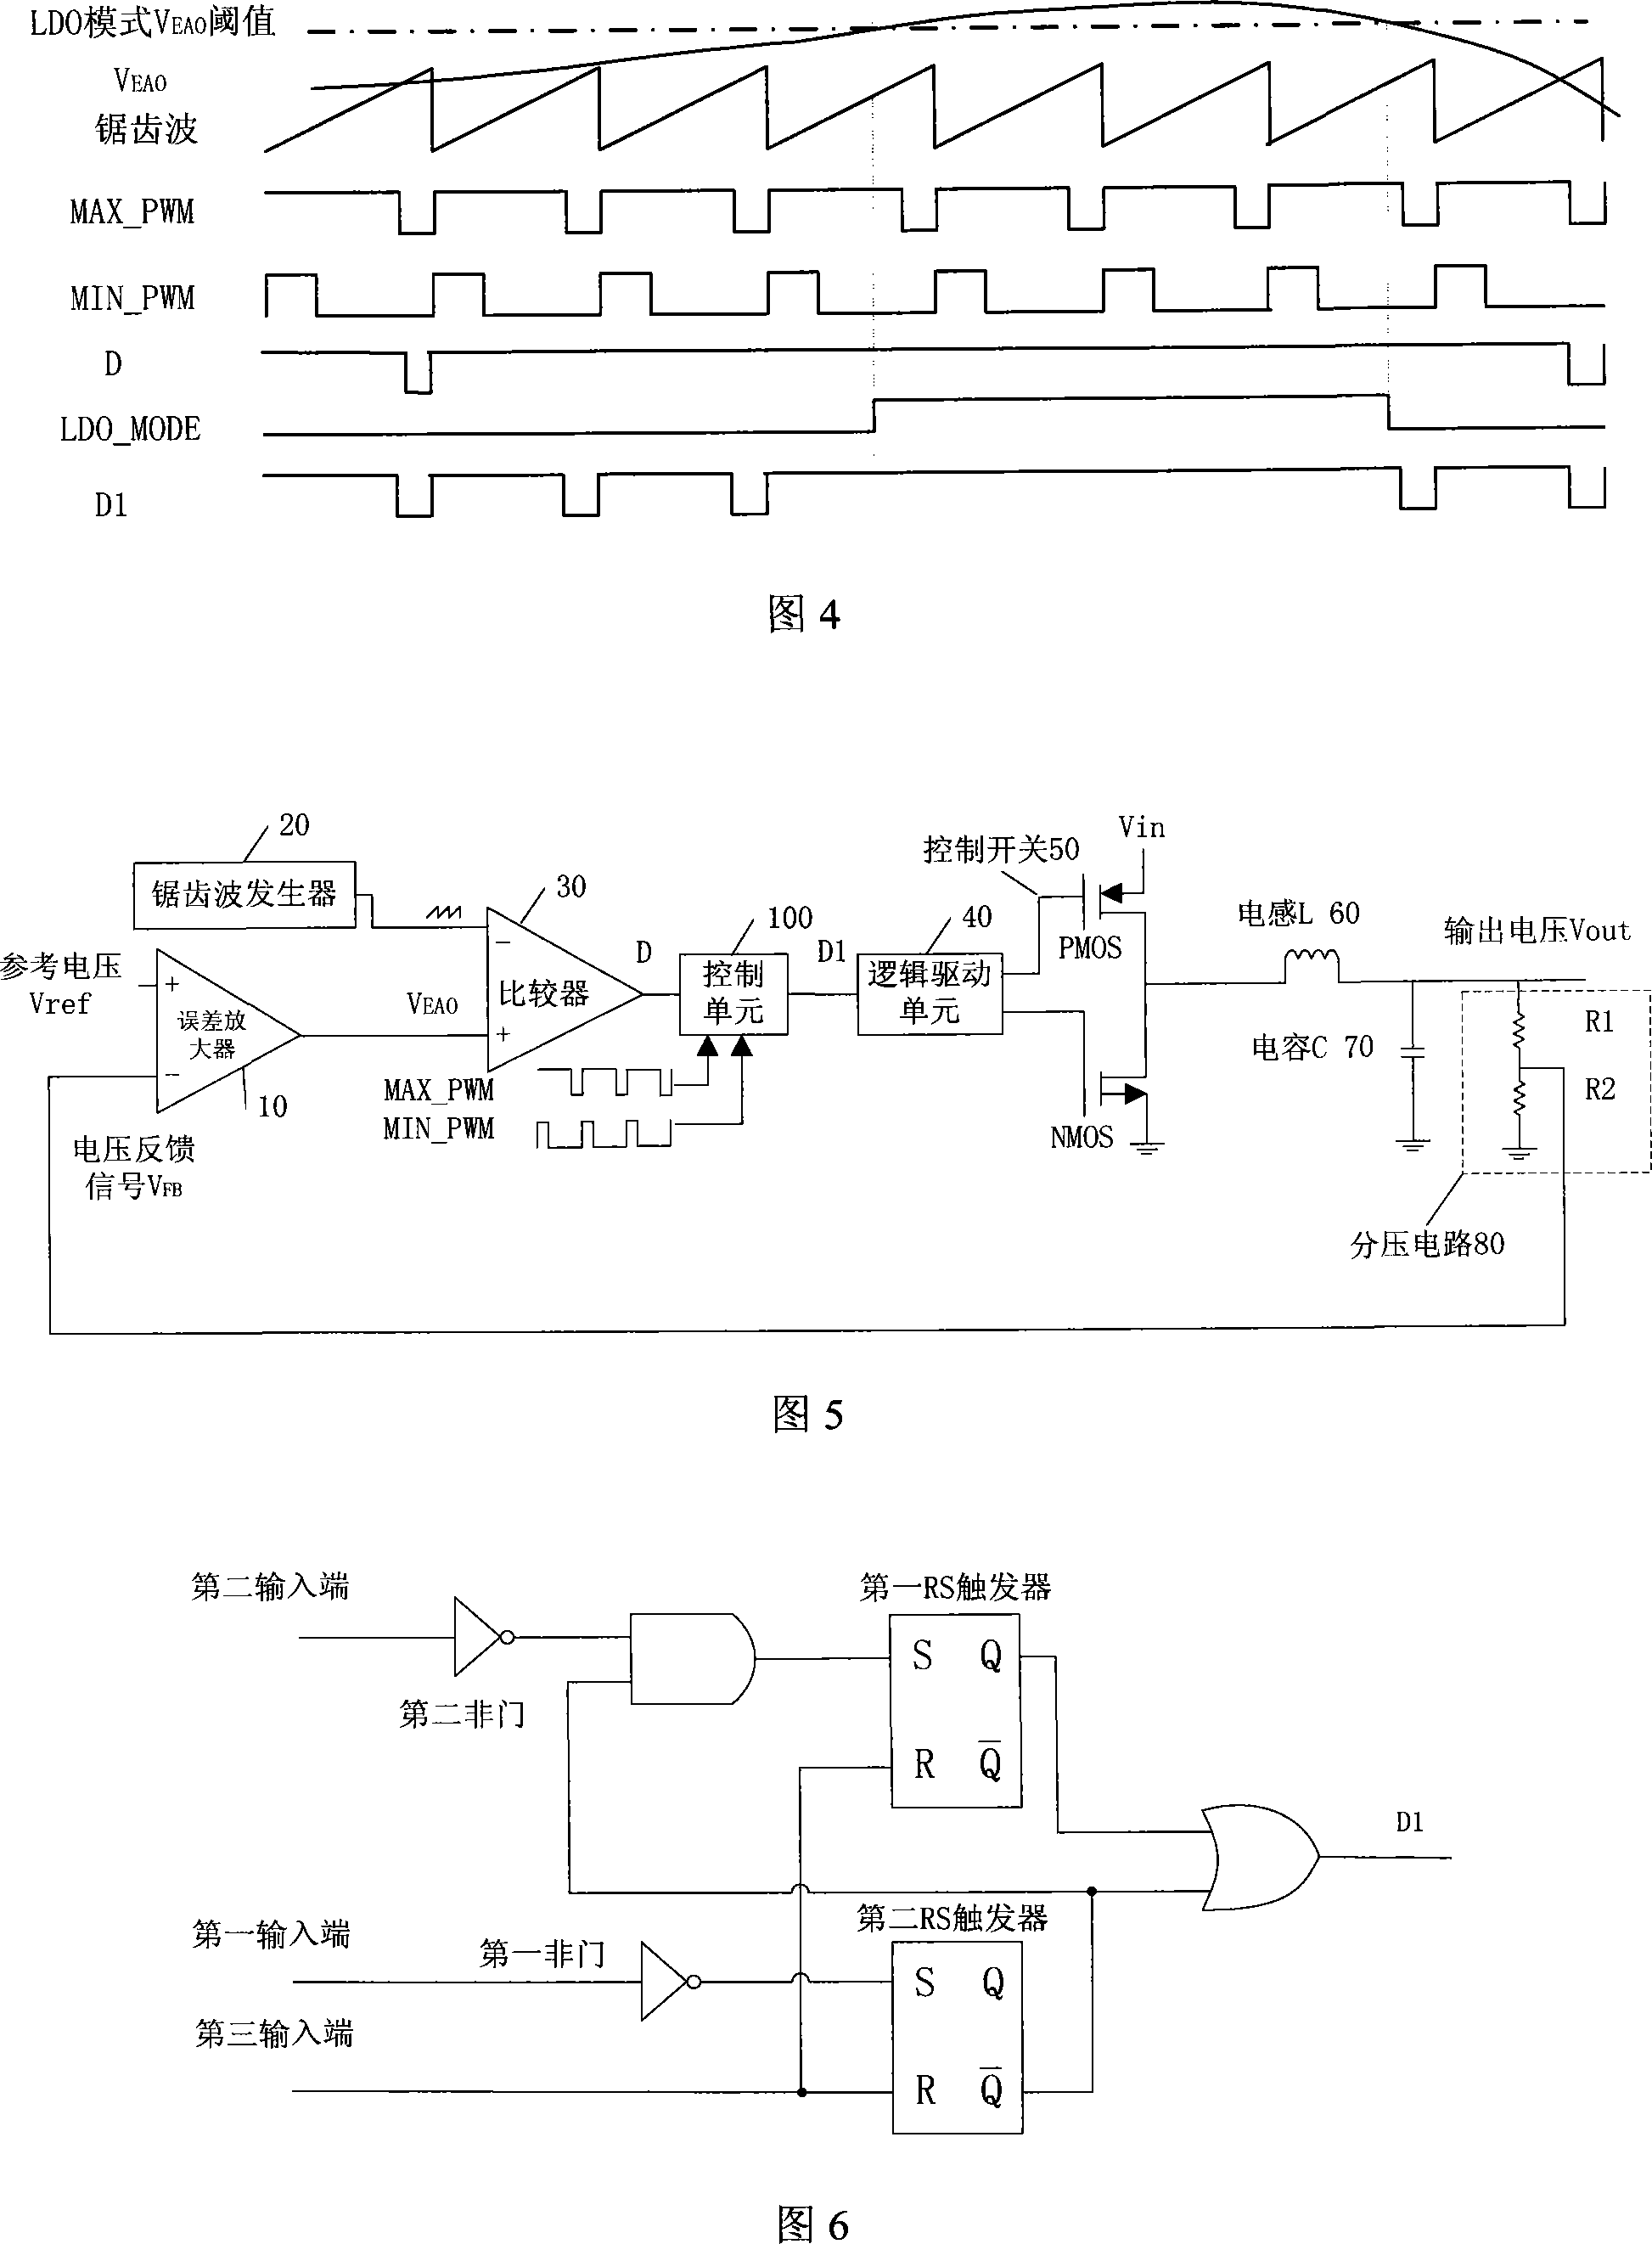 Direct current switch power supply control circuit